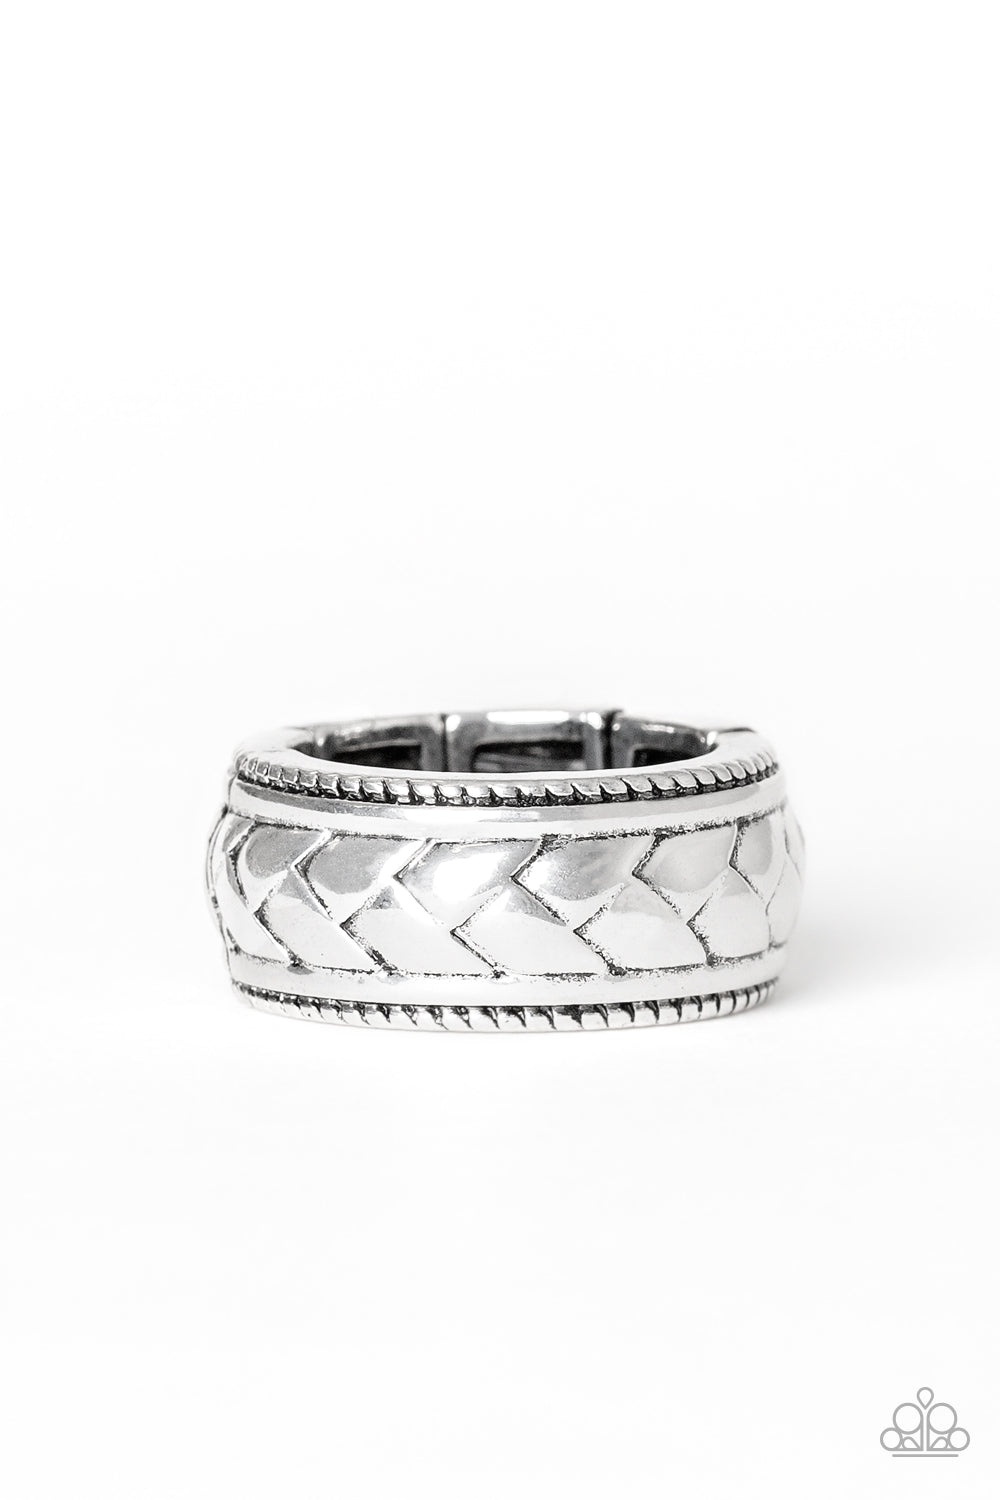 Field Artillery - Silver Brushed in an antiqued finish, a chevron-like pattern is embossed across the center of a textured silver band for a casual look. Features a stretchy band for a flexible fit.  Sold as one individual ring.